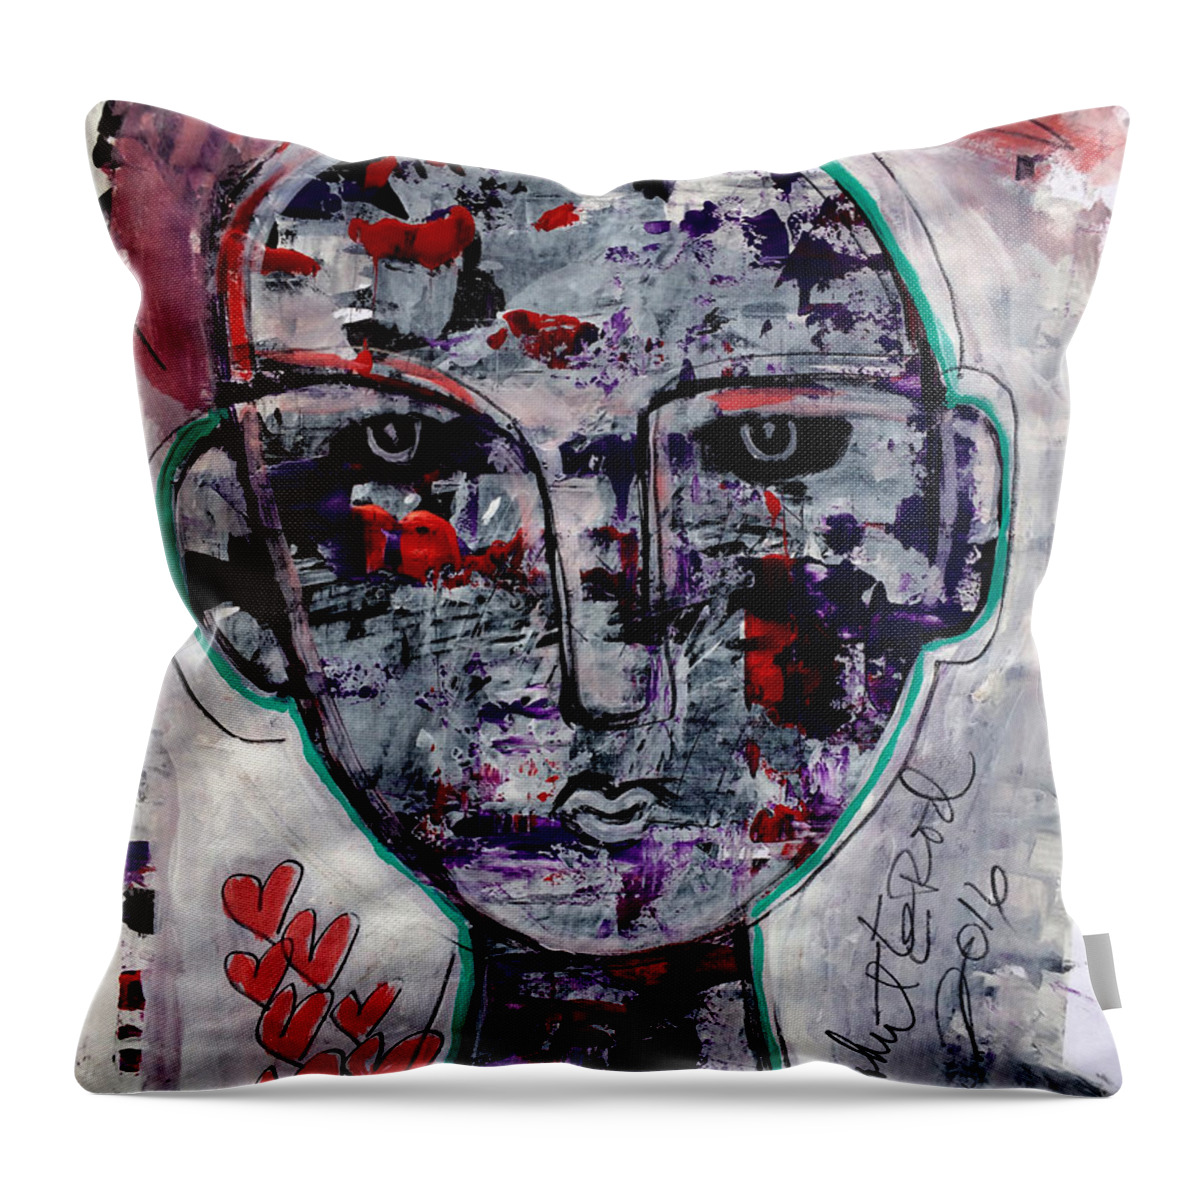 Girl Throw Pillow featuring the painting Raptured by Robert R Splashy Art Abstract Paintings